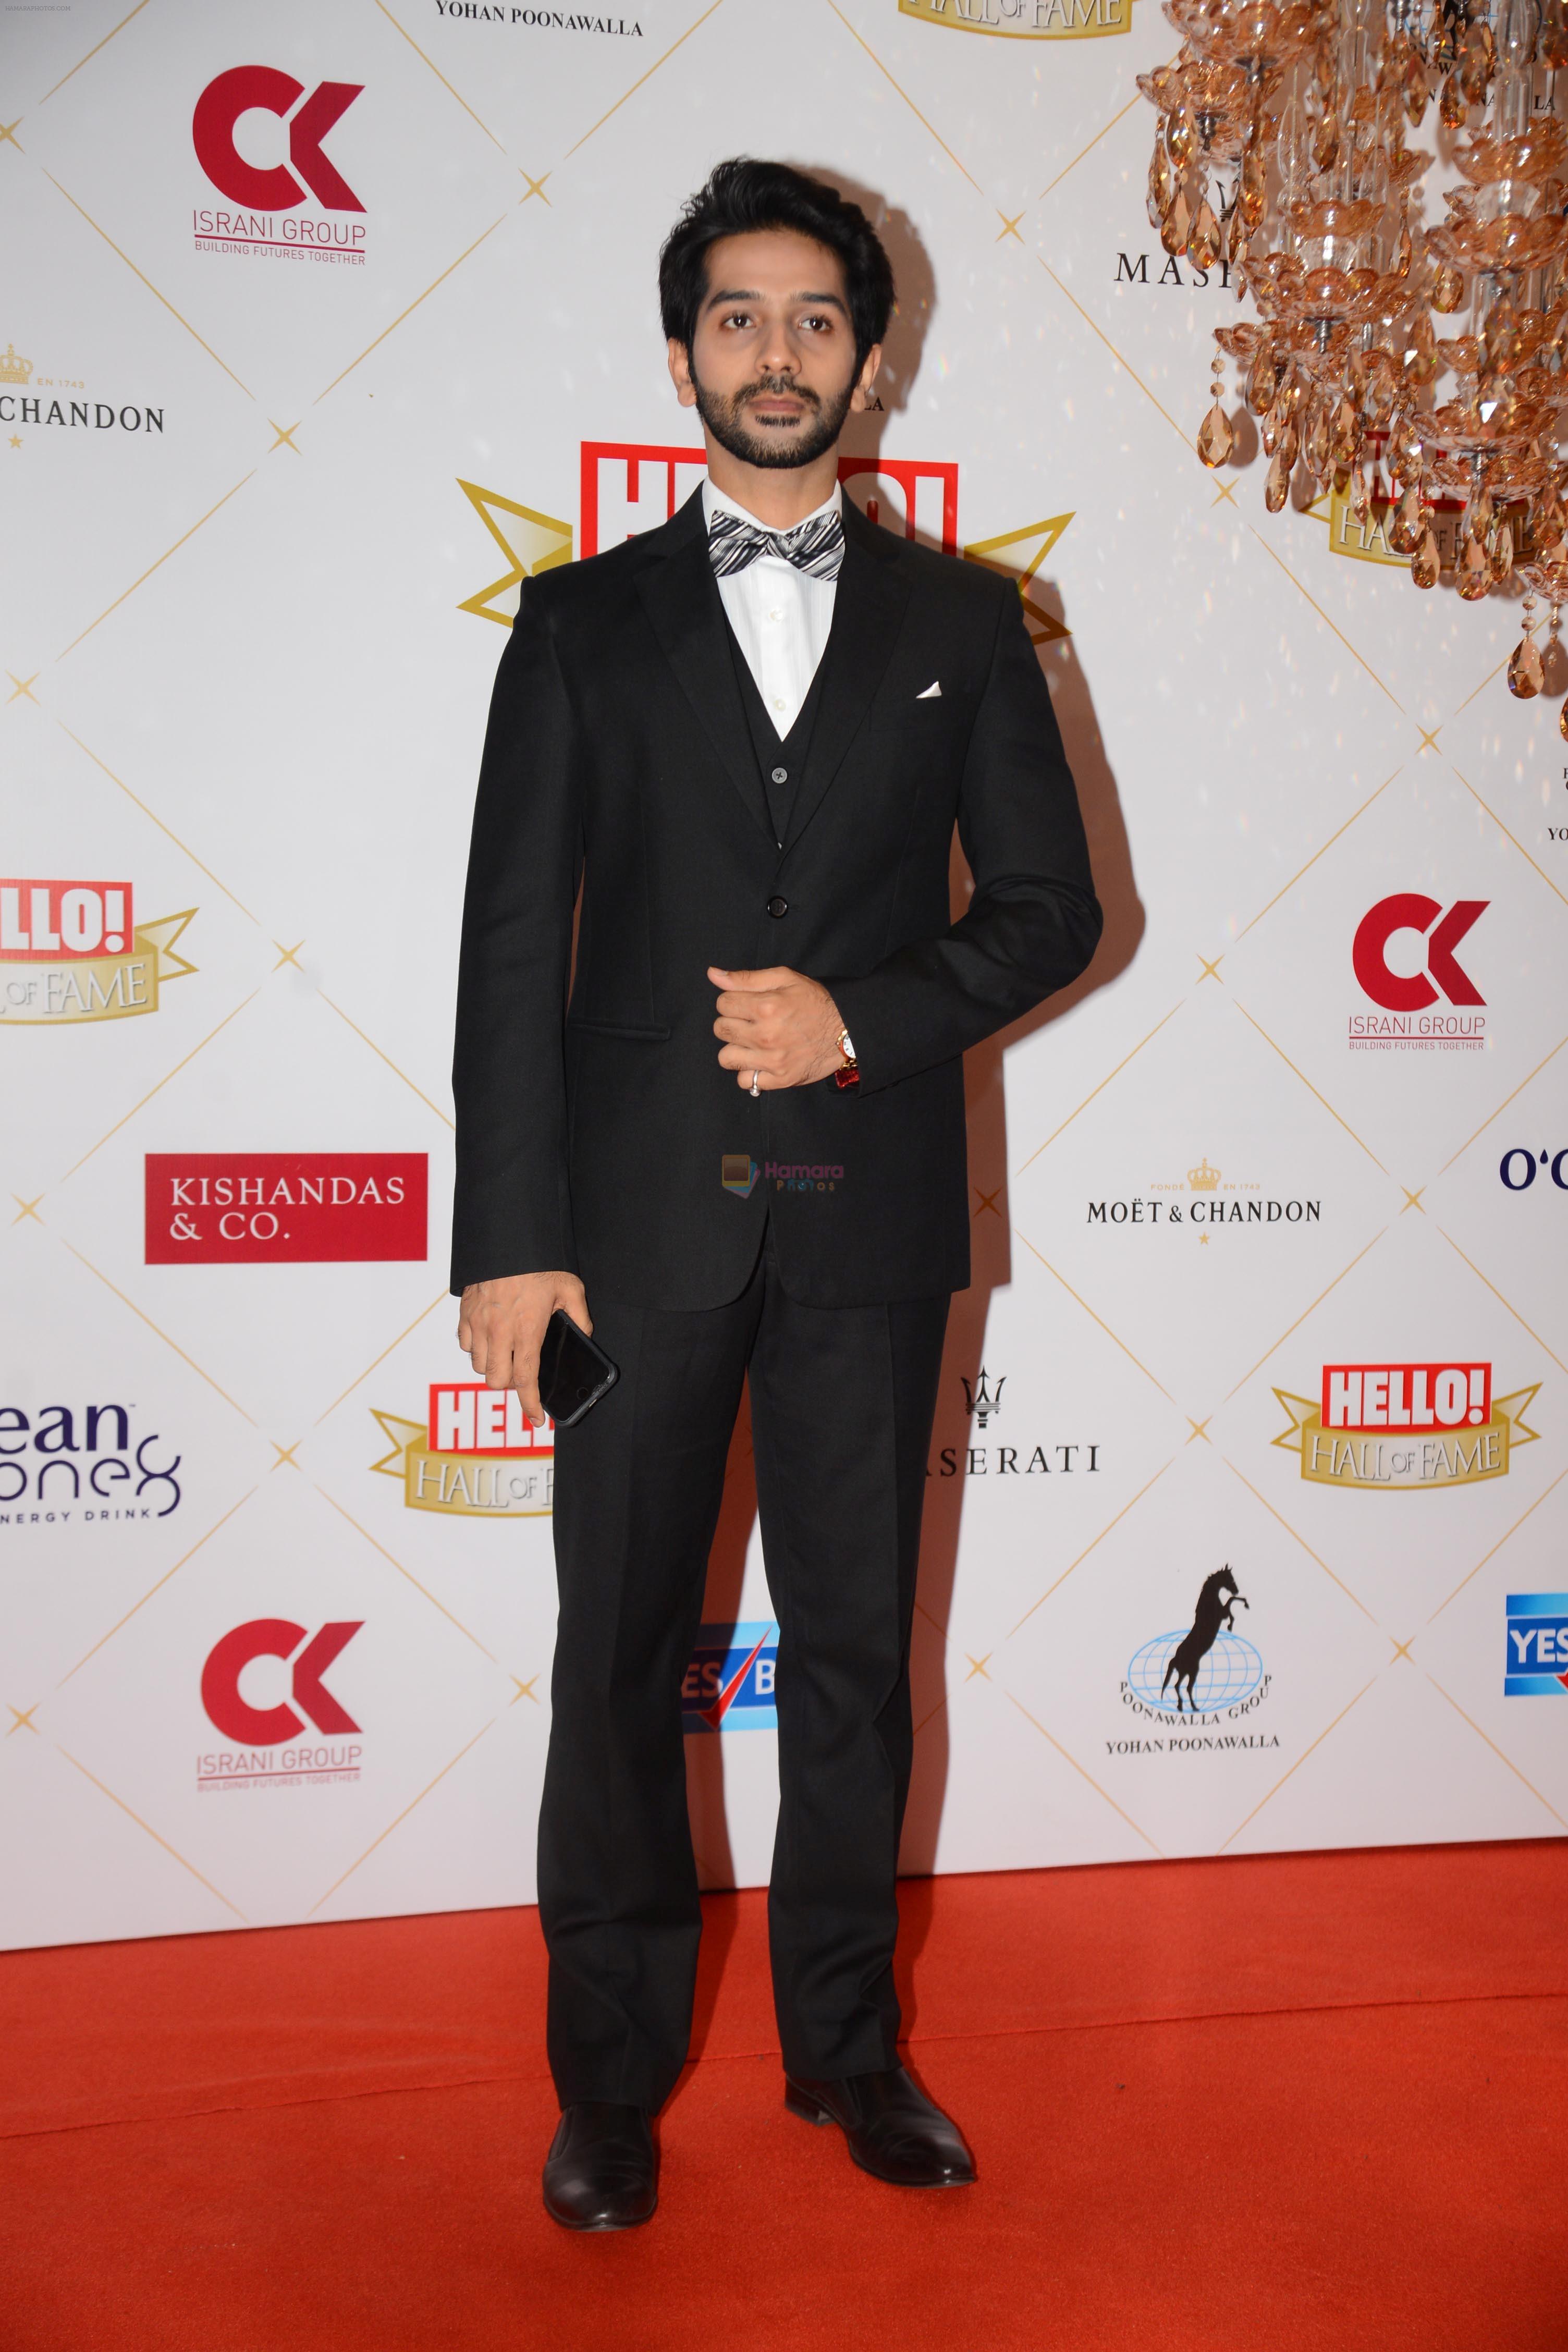 at the Hello Hall of Fame Awards in St Regis hotel on 18th March 2019